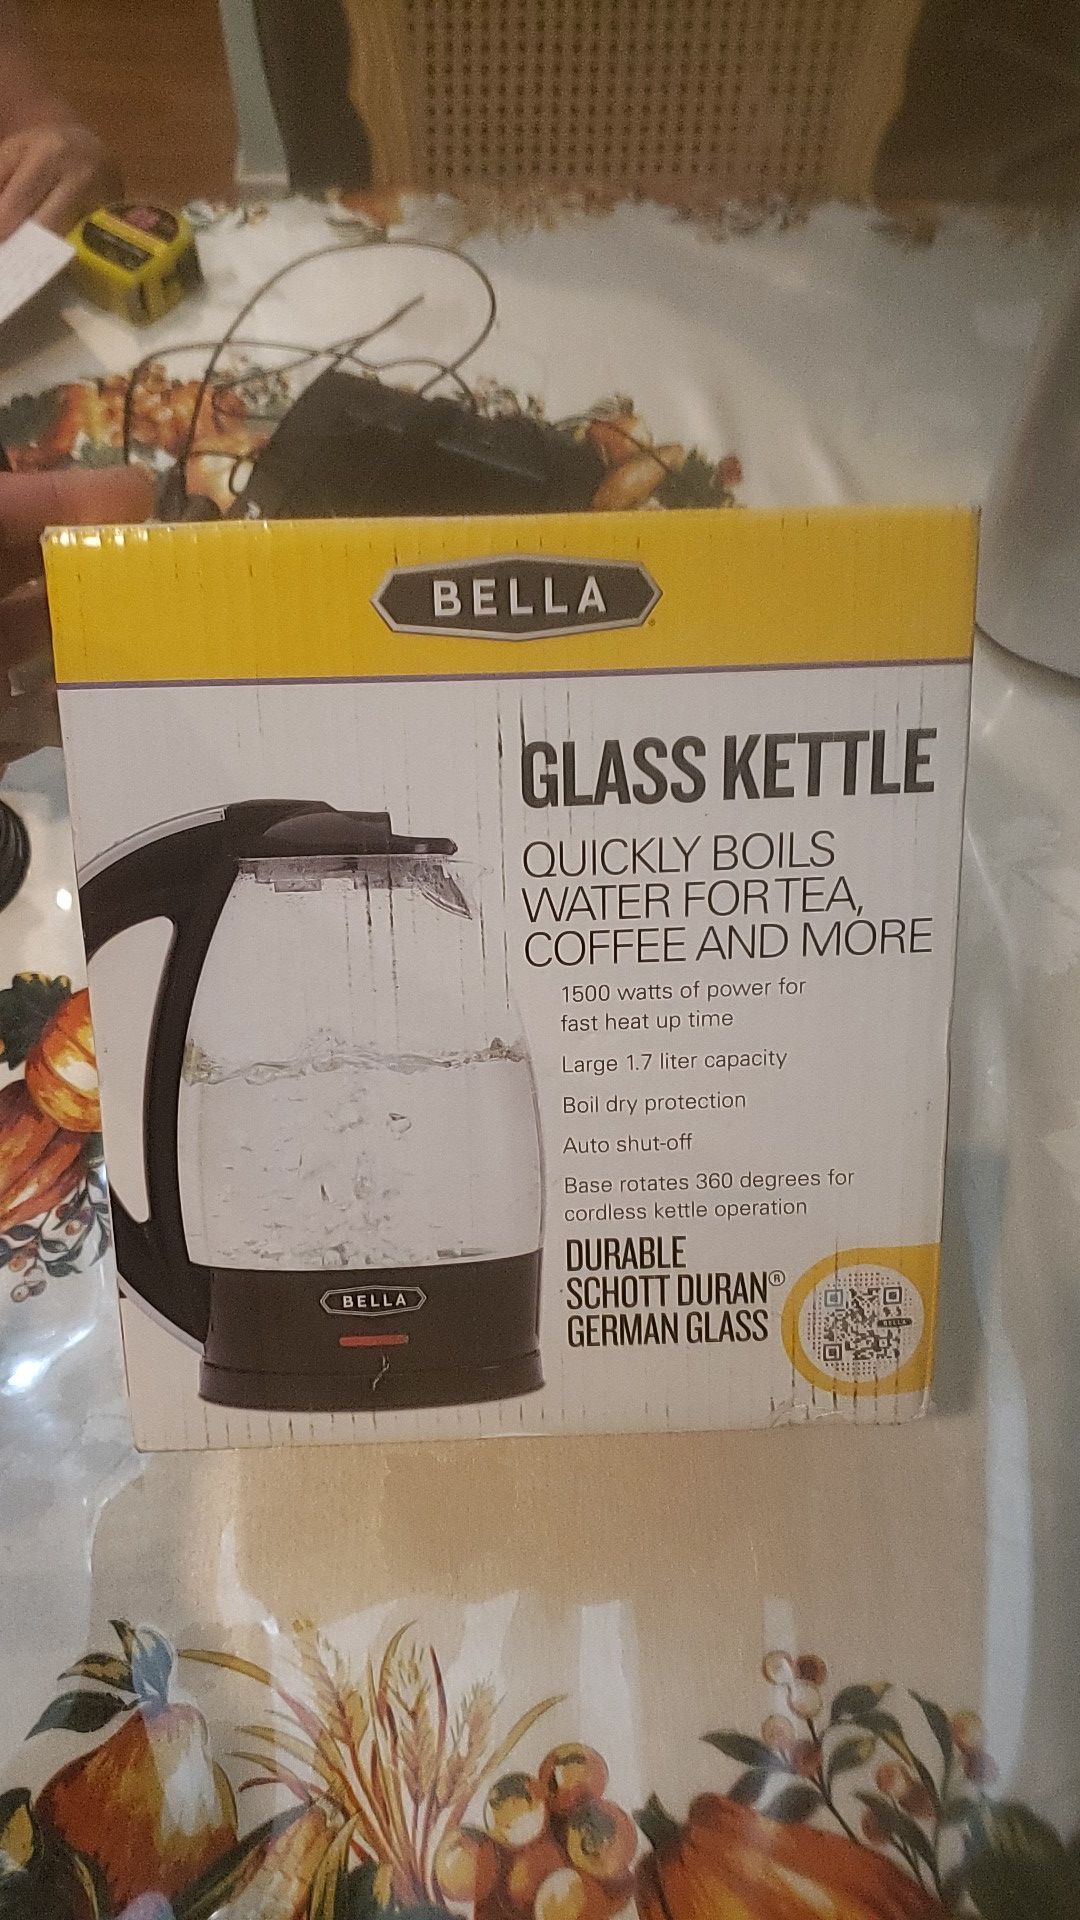 Glass kettle - new - never used